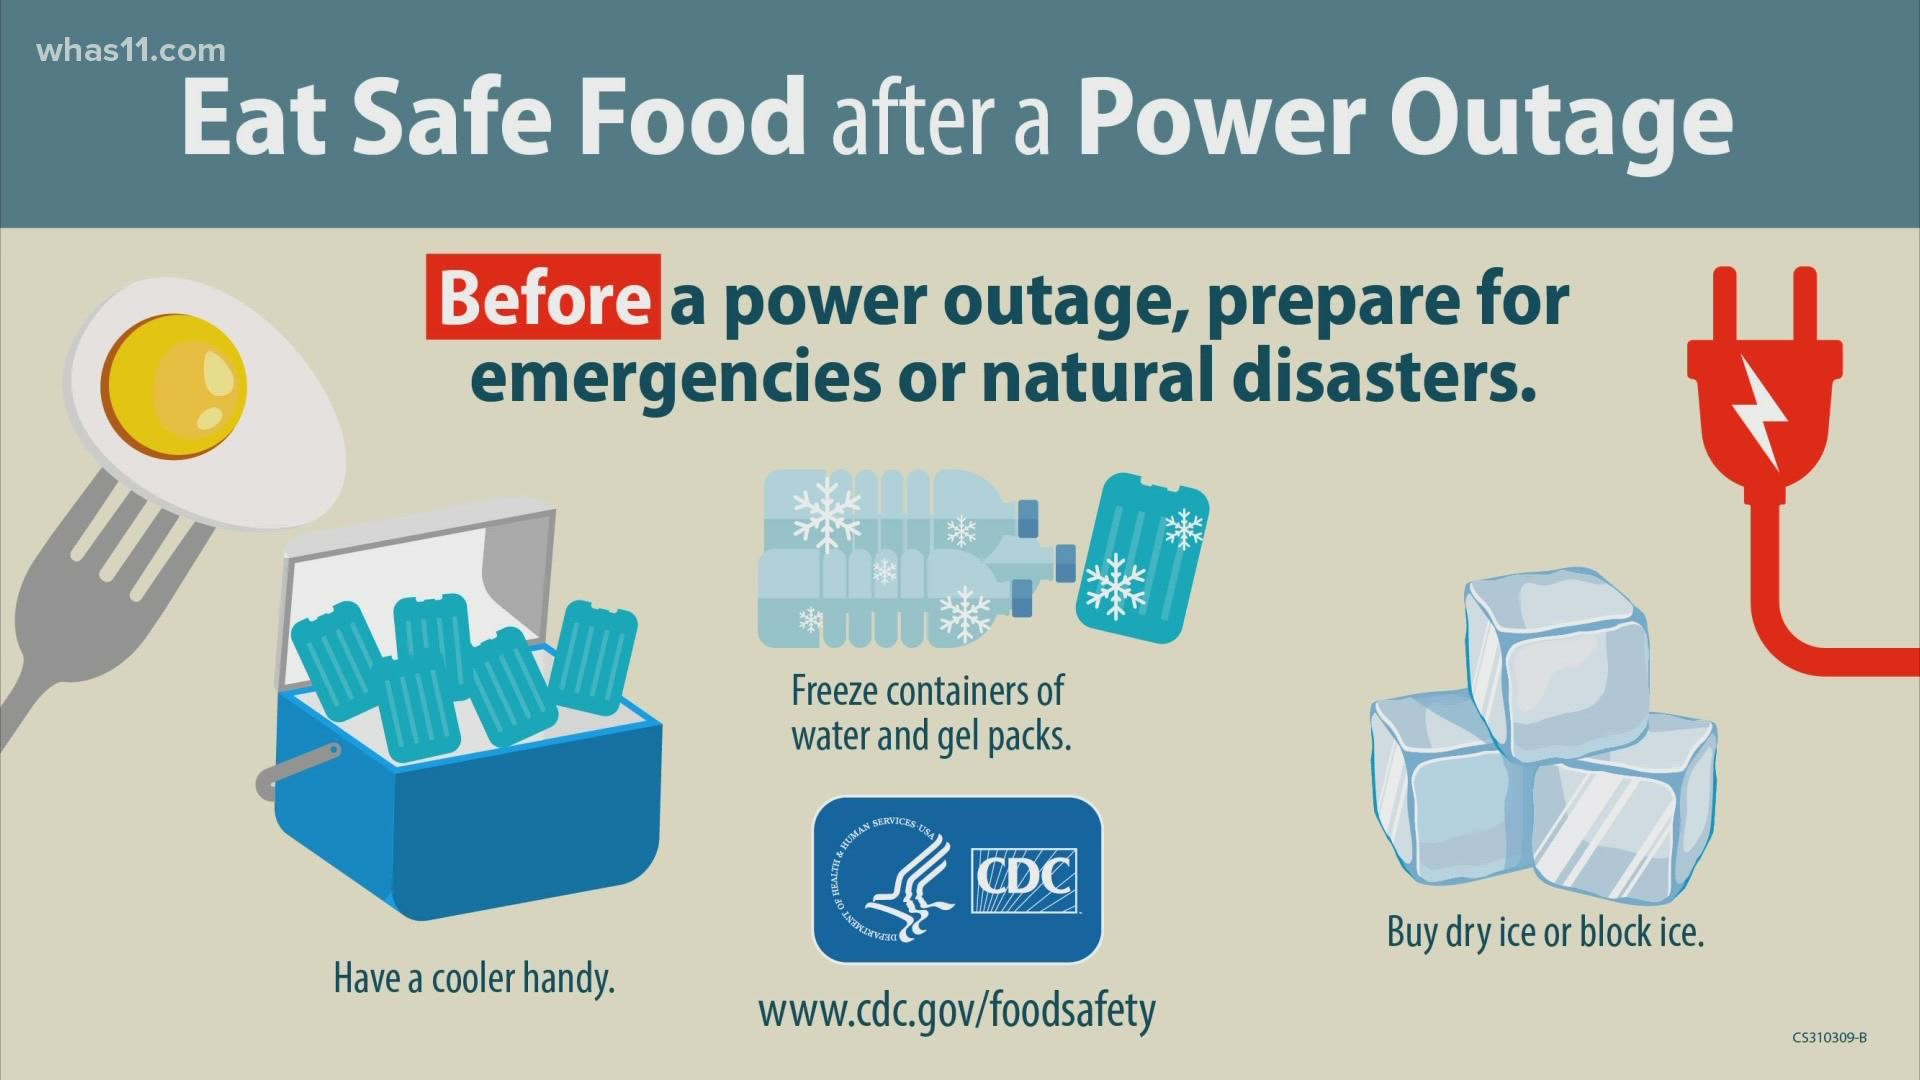 5 Essential Things you Need during a Power Outage